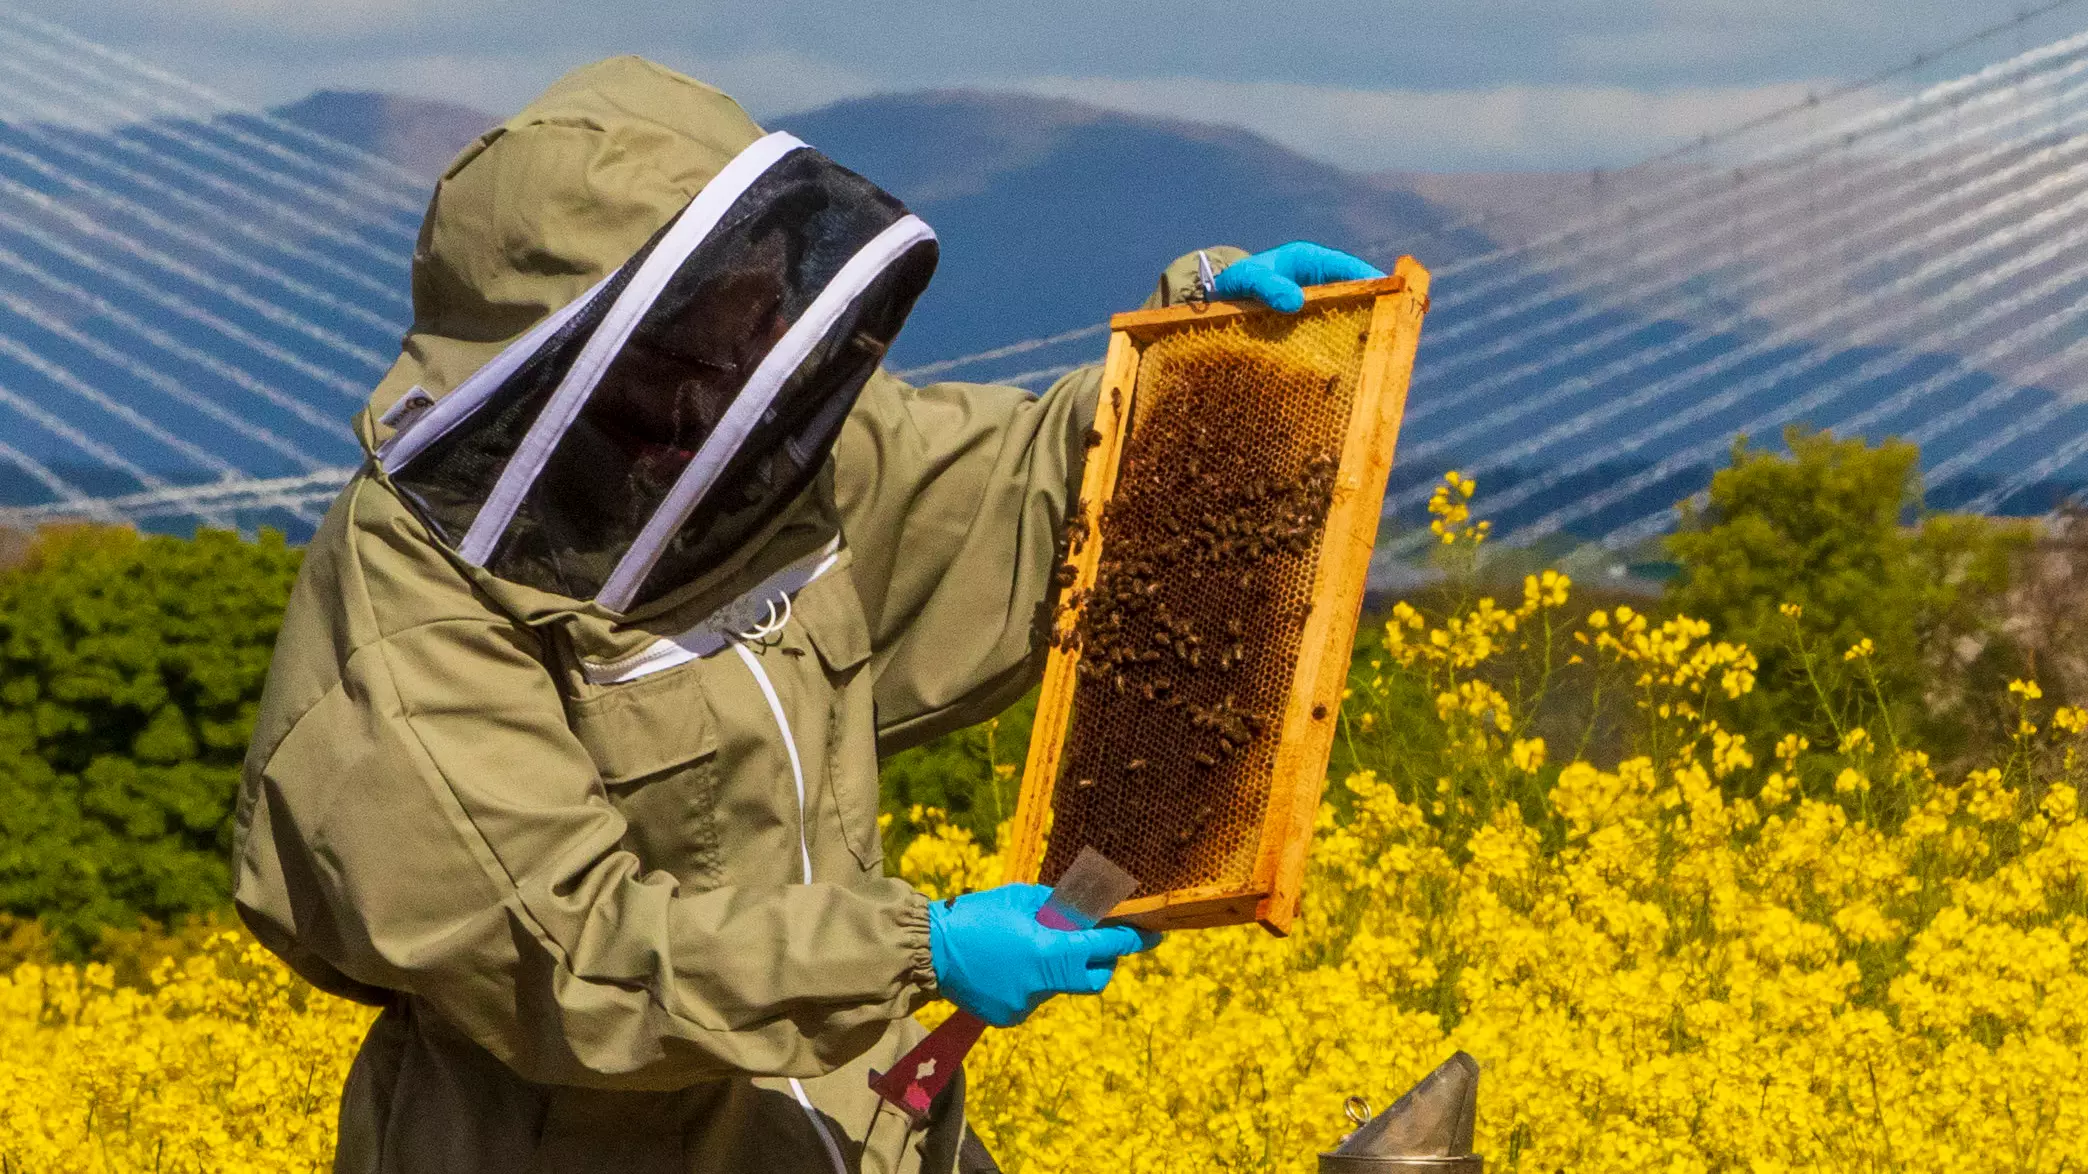 Bees Are Thriving In Lockdown With Less Pollution